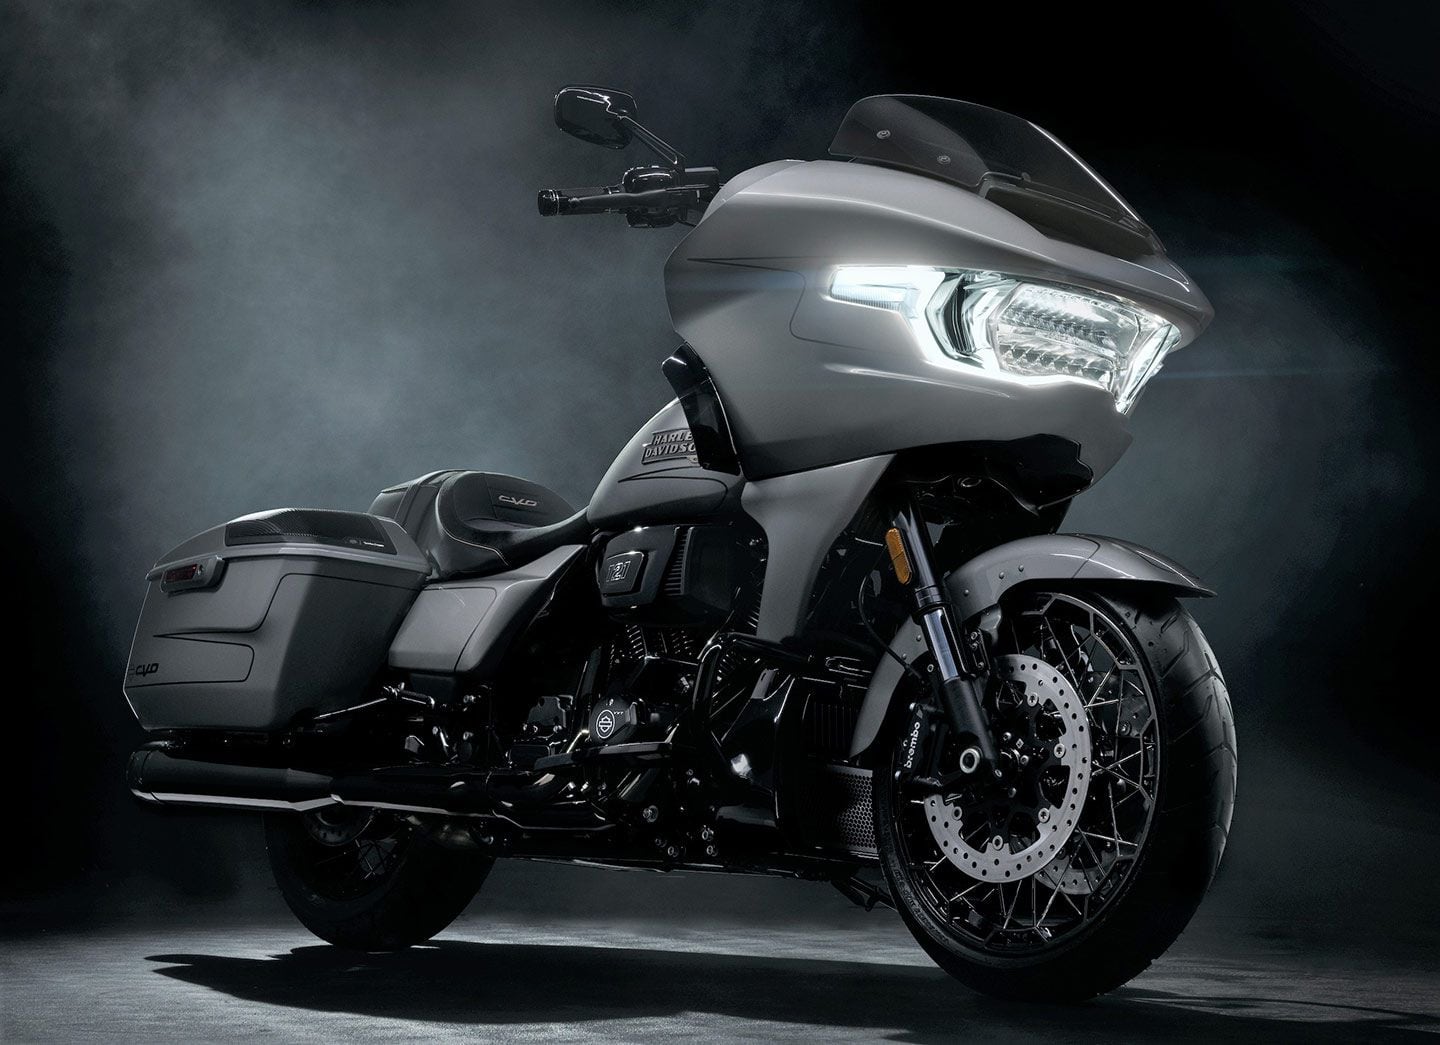 Harley-Davidson, Indian Both Roll Out Limited-Edition, High-End